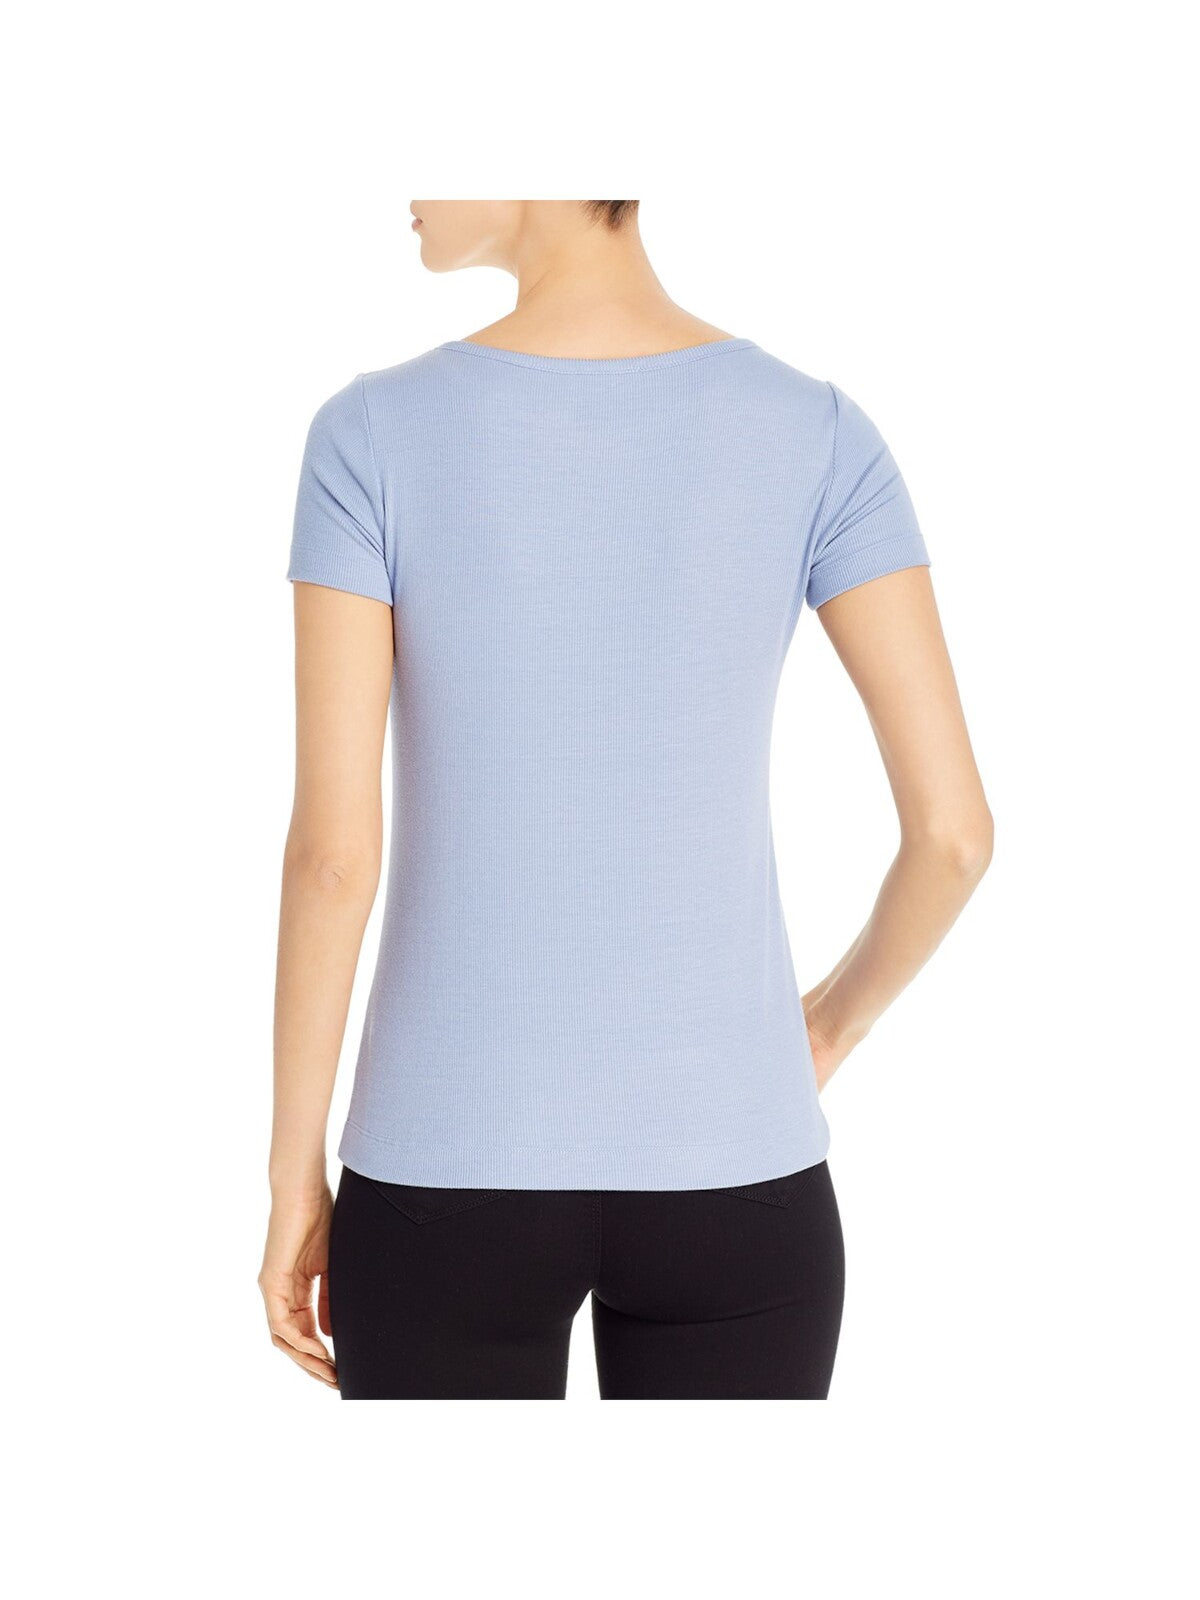 THREE DOTS Womens Blue Stretch Ribbed Semi-fitted Short Sleeve Scoop Neck T-Shirt M